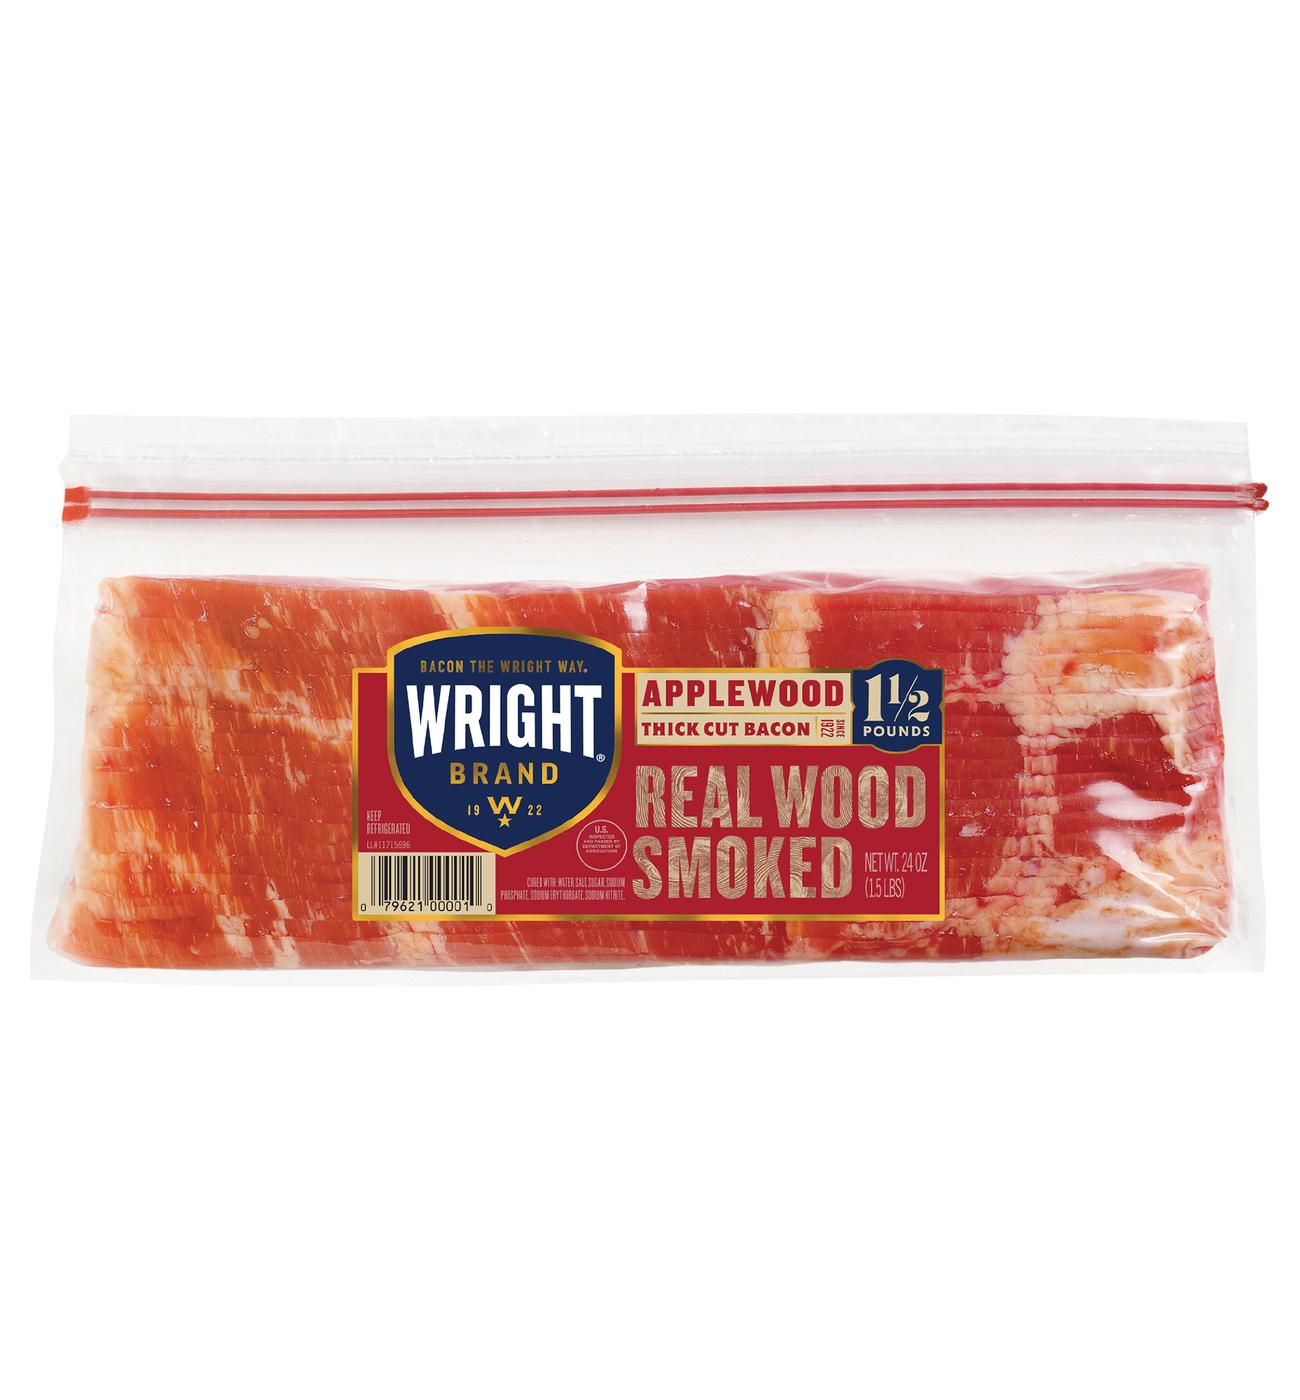 Wright Brand Applewood Smoked Thick Cut Bacon; image 1 of 6